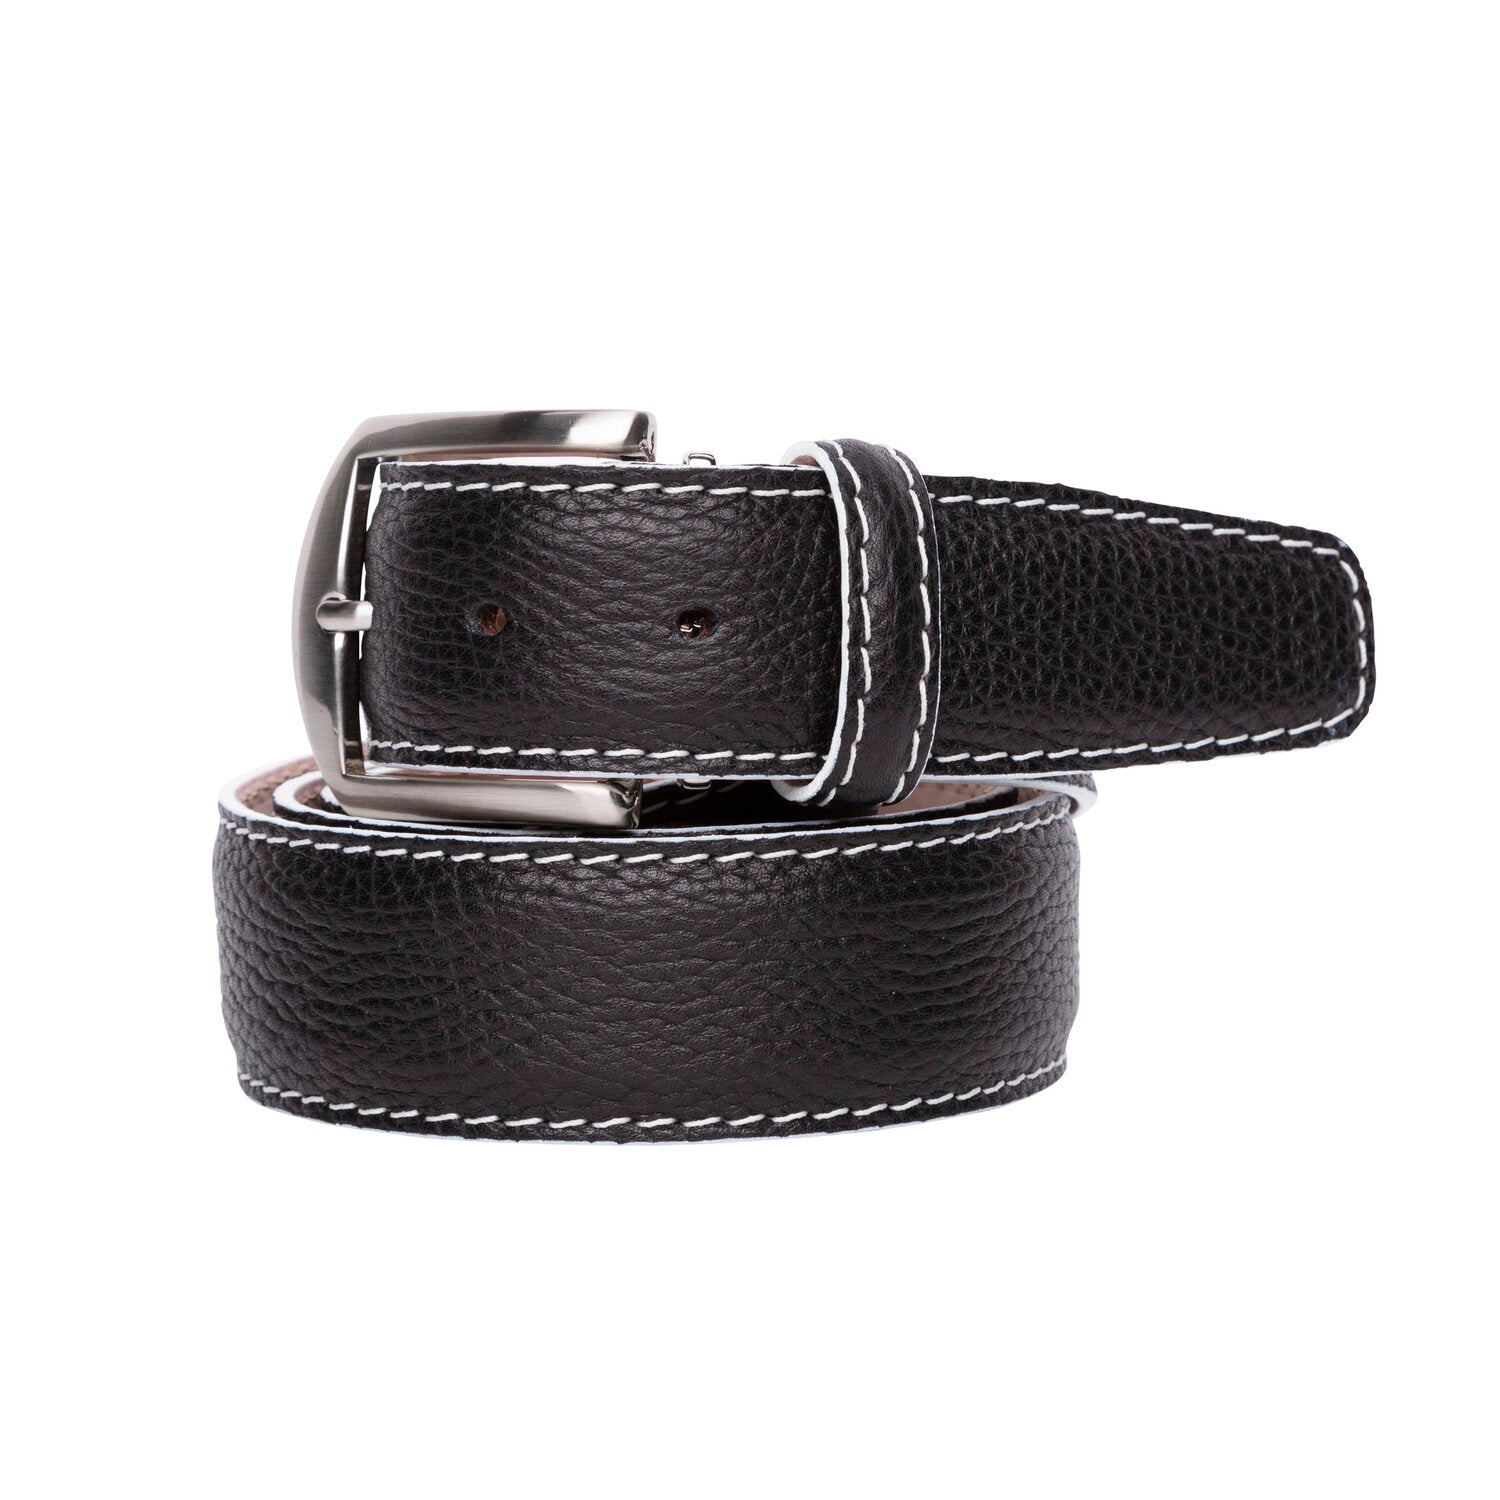 French Pebble Grain Calf Belt in Black with White Stitching by L.E.N. Bespoke